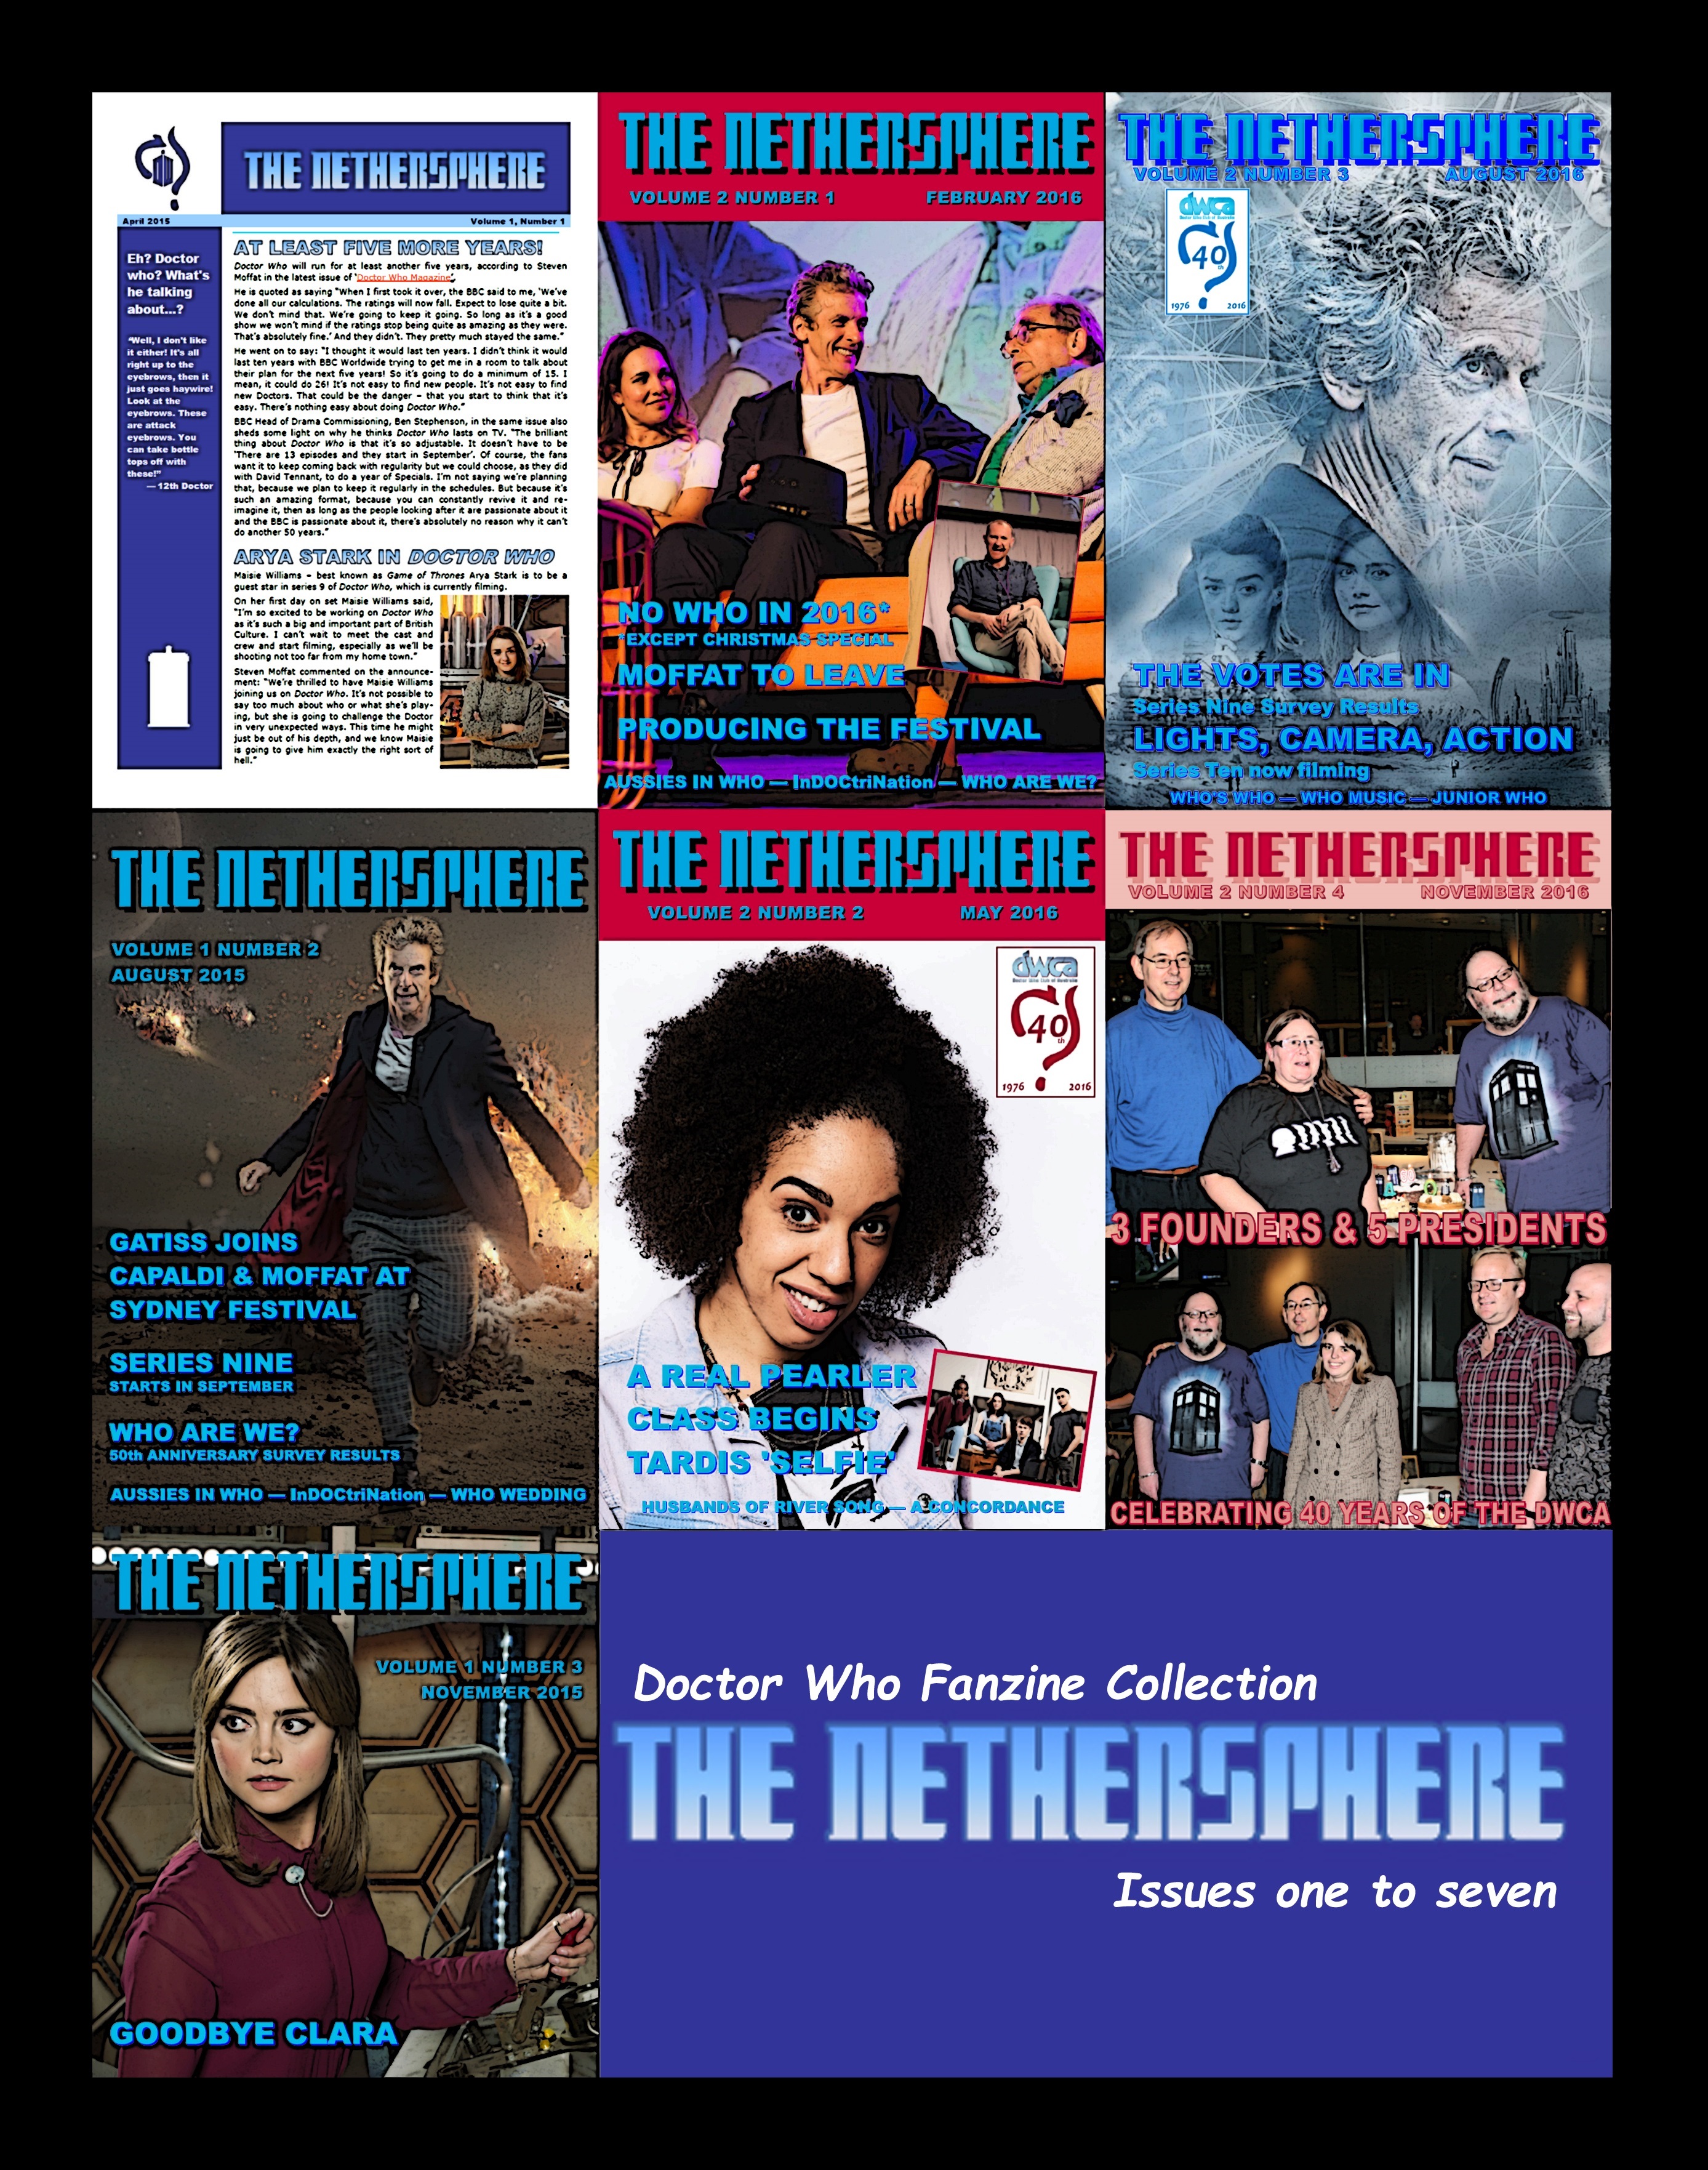 DWCA Publishing presents The Nethersphere collection